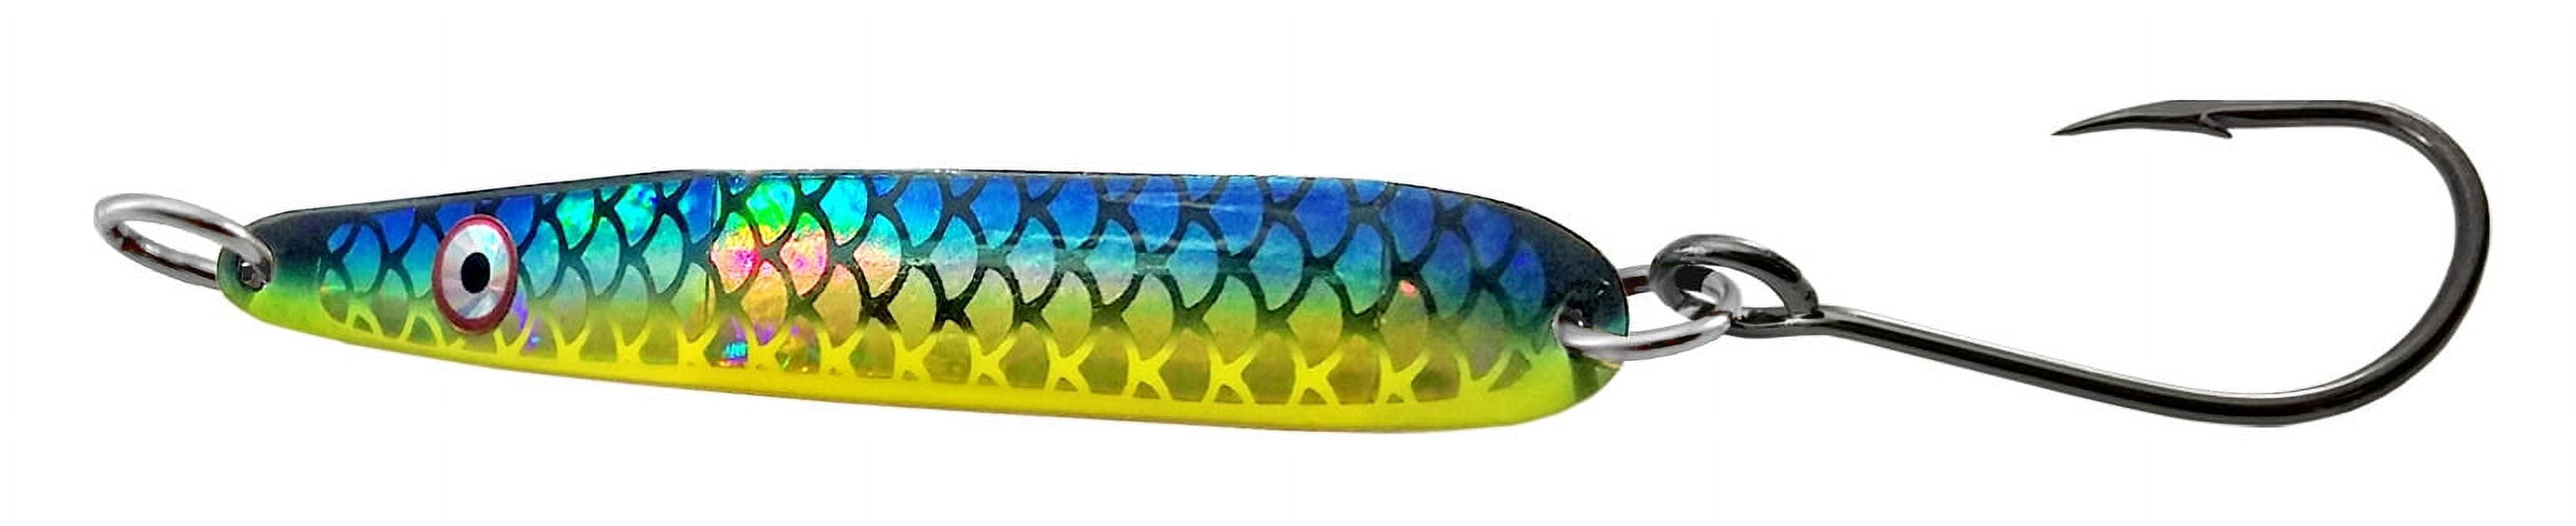 Lunker City Fin-S-Fish 3-1/2in 10bg Rainbow Trout